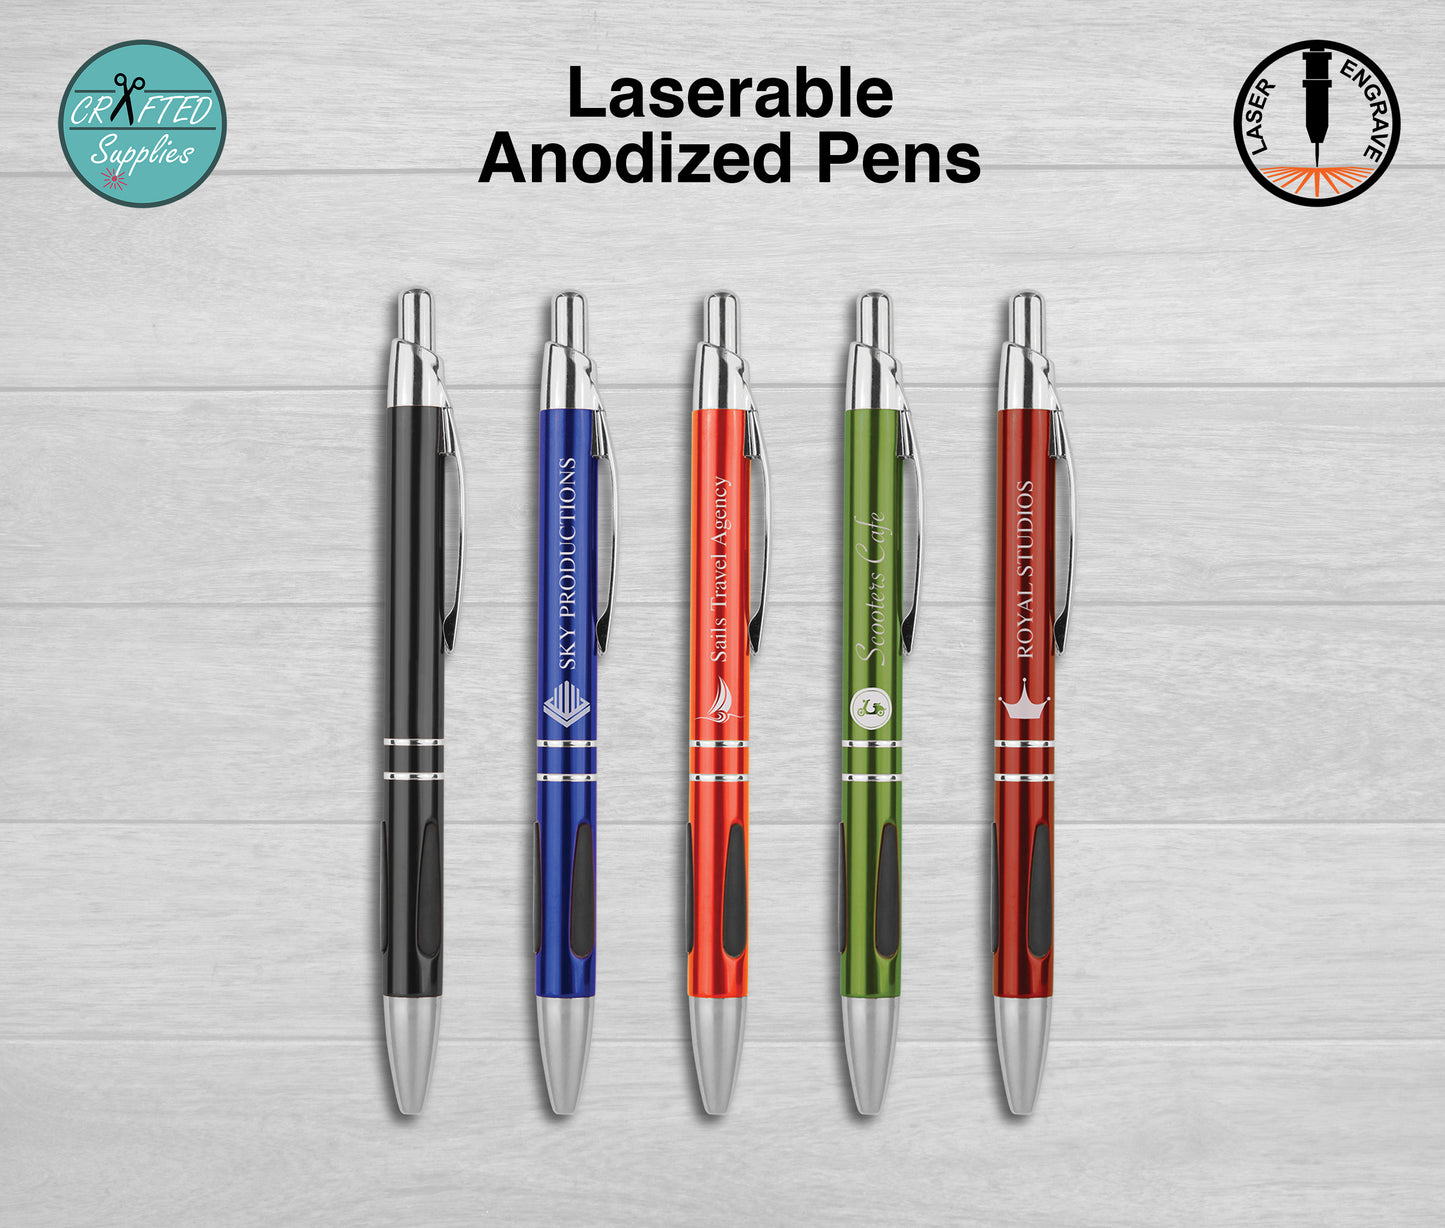 Anodized aluminum pens for laser engraving